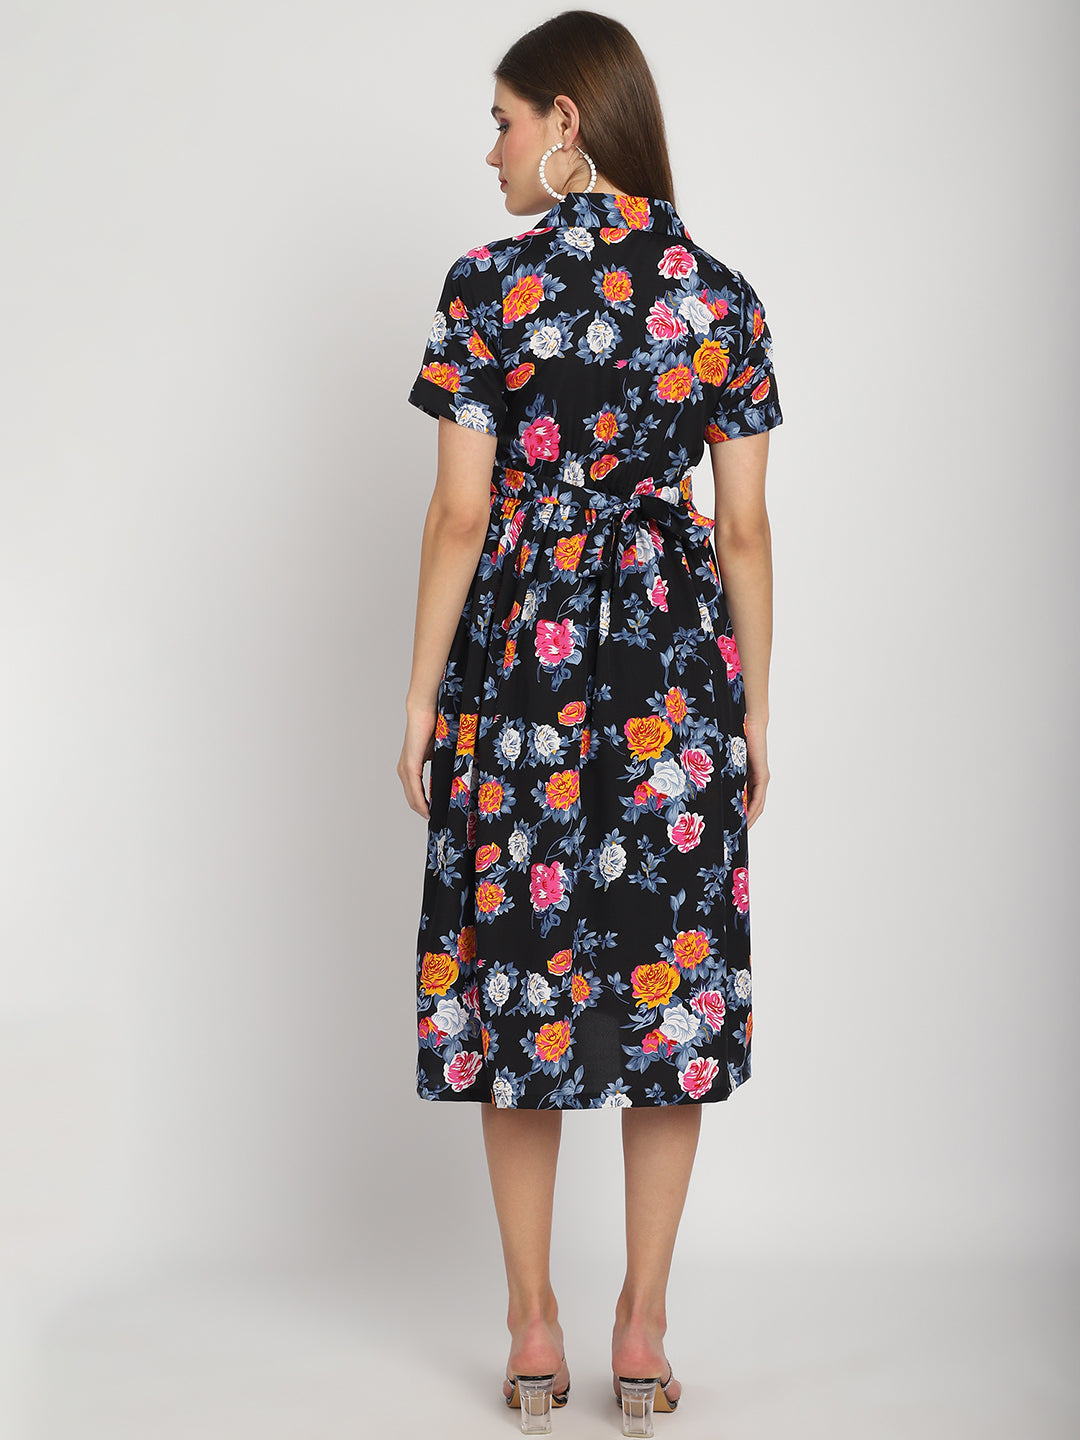 Black Abstract Printed Fit and Flare Maternity Midi Dress